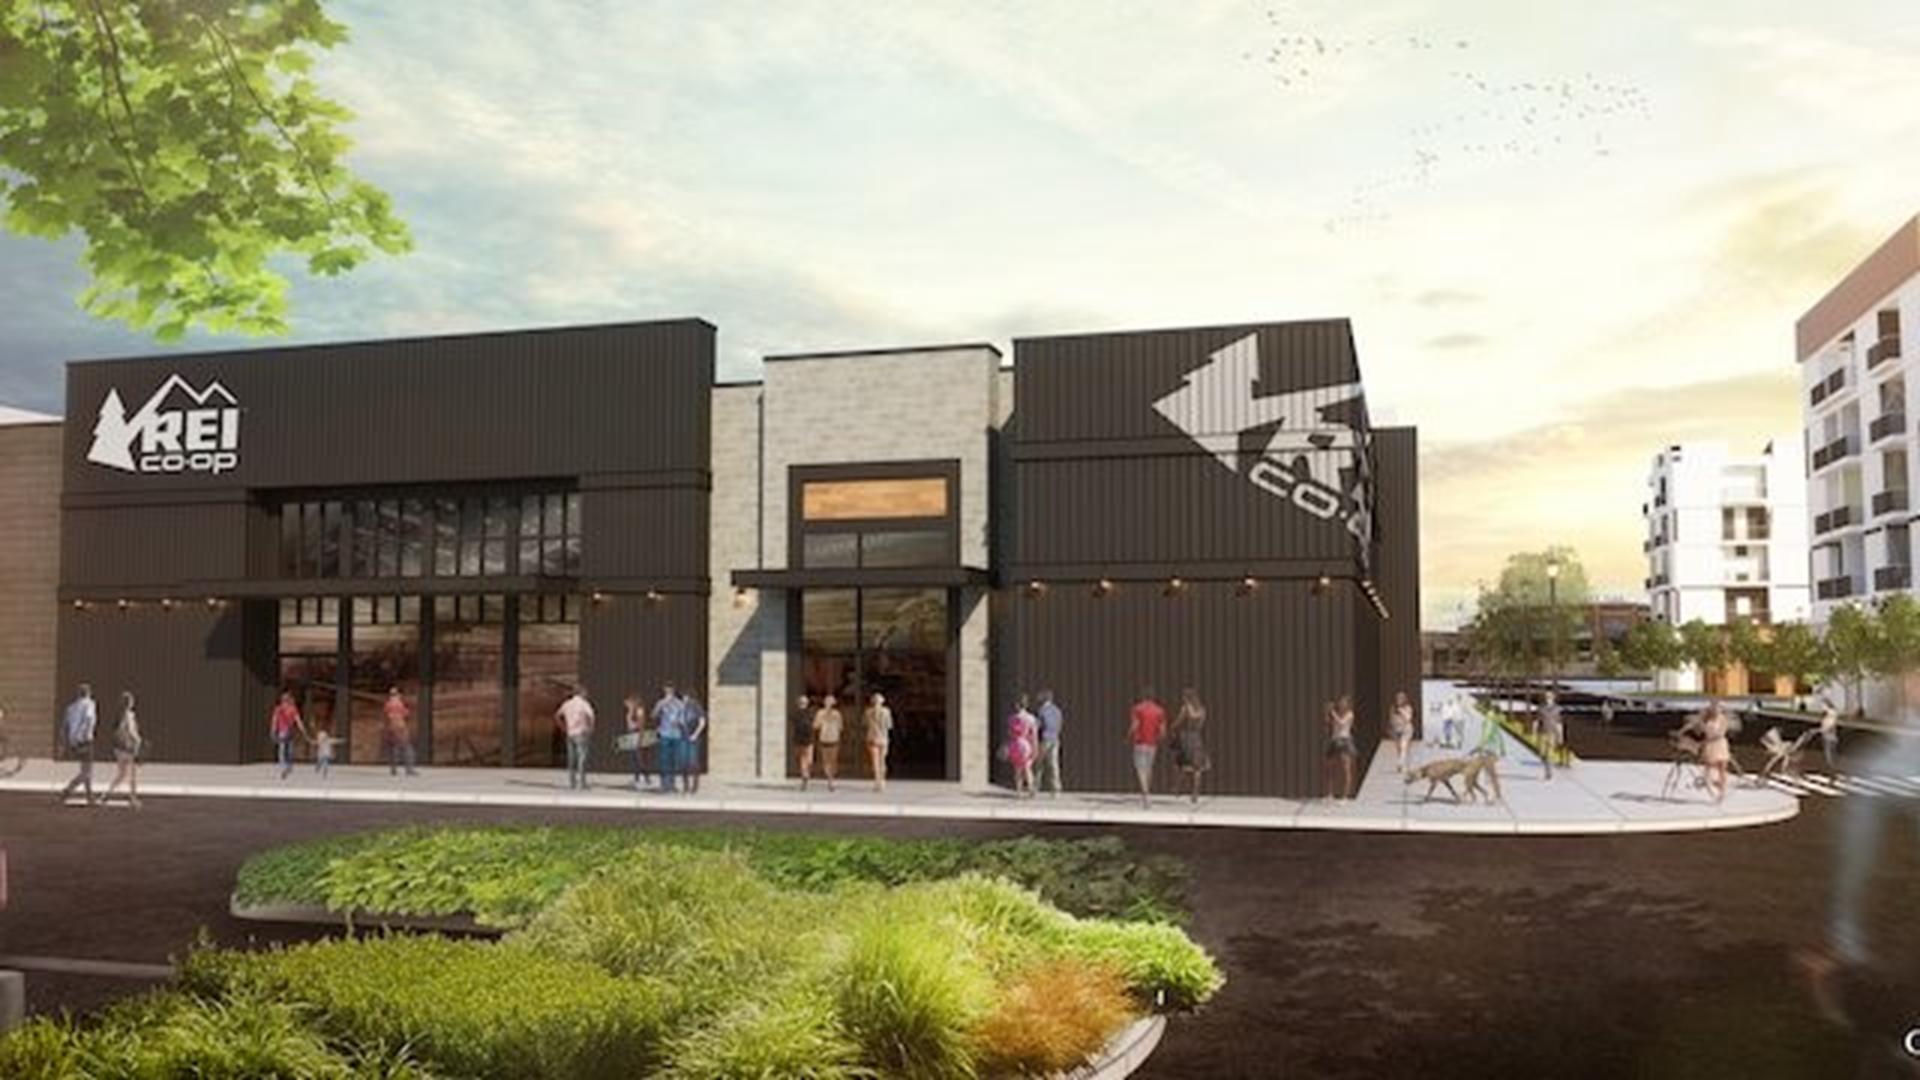 Specialty outdoor retailer REI Co-op is coming to downtown Columbia, bringing with it 45 new new jobs.